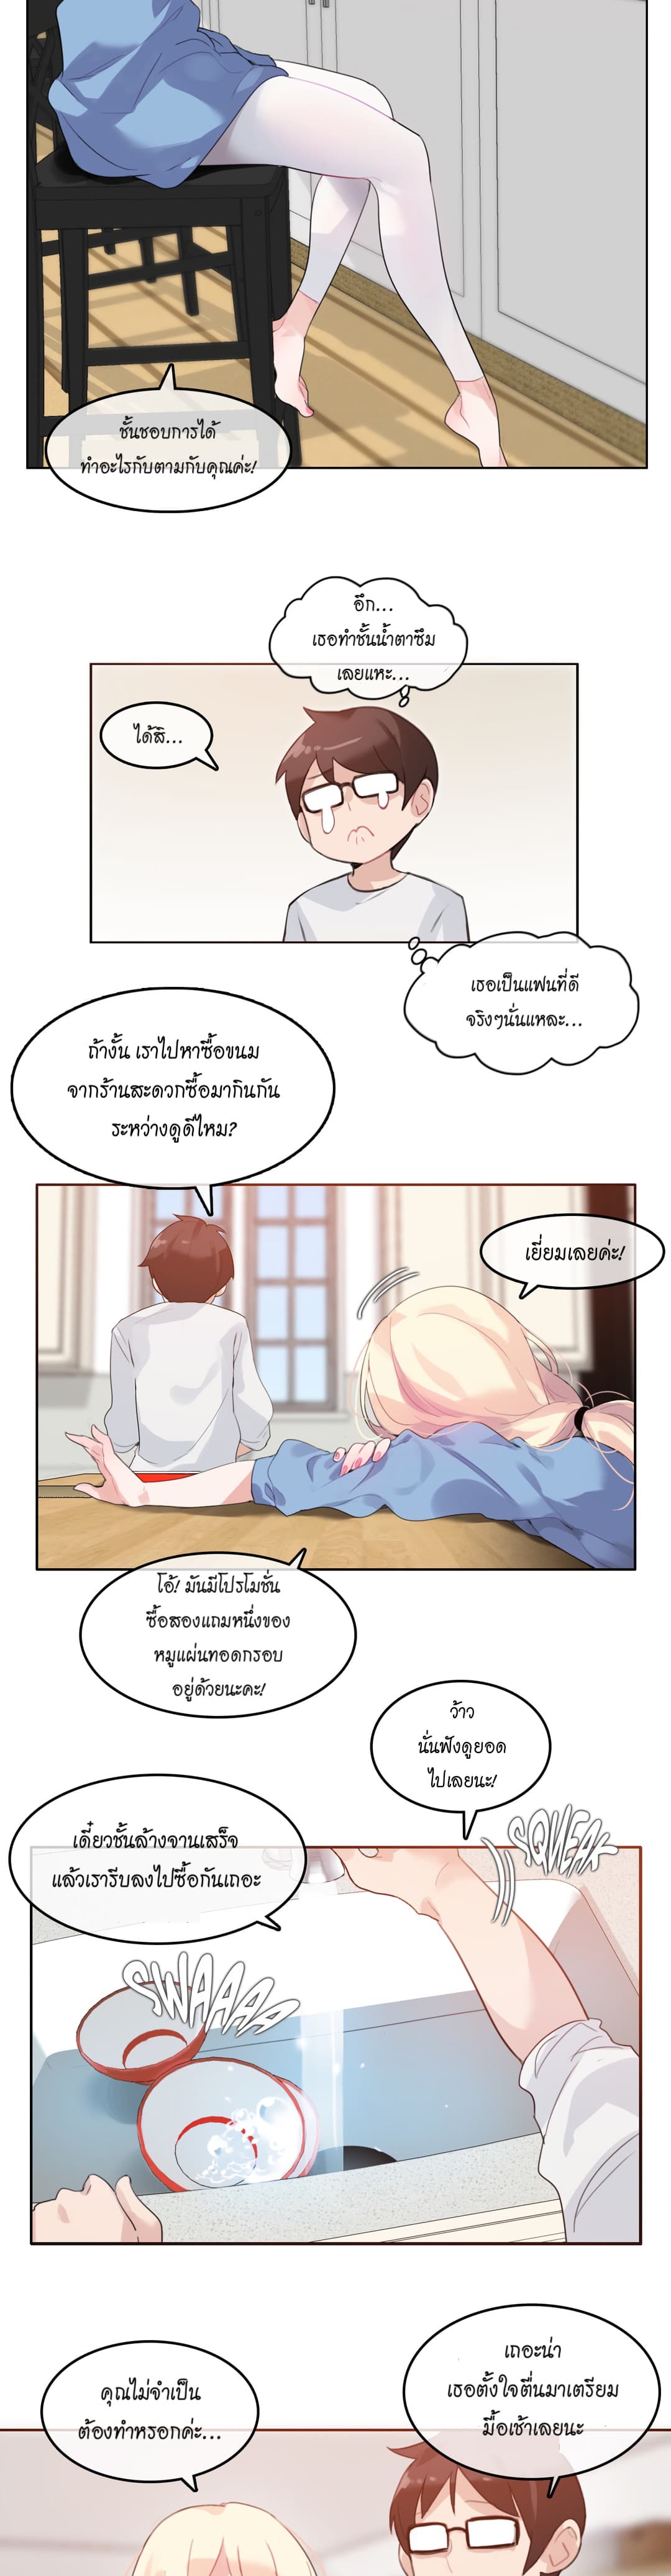 A Pervert’s Daily Life 28 (19)